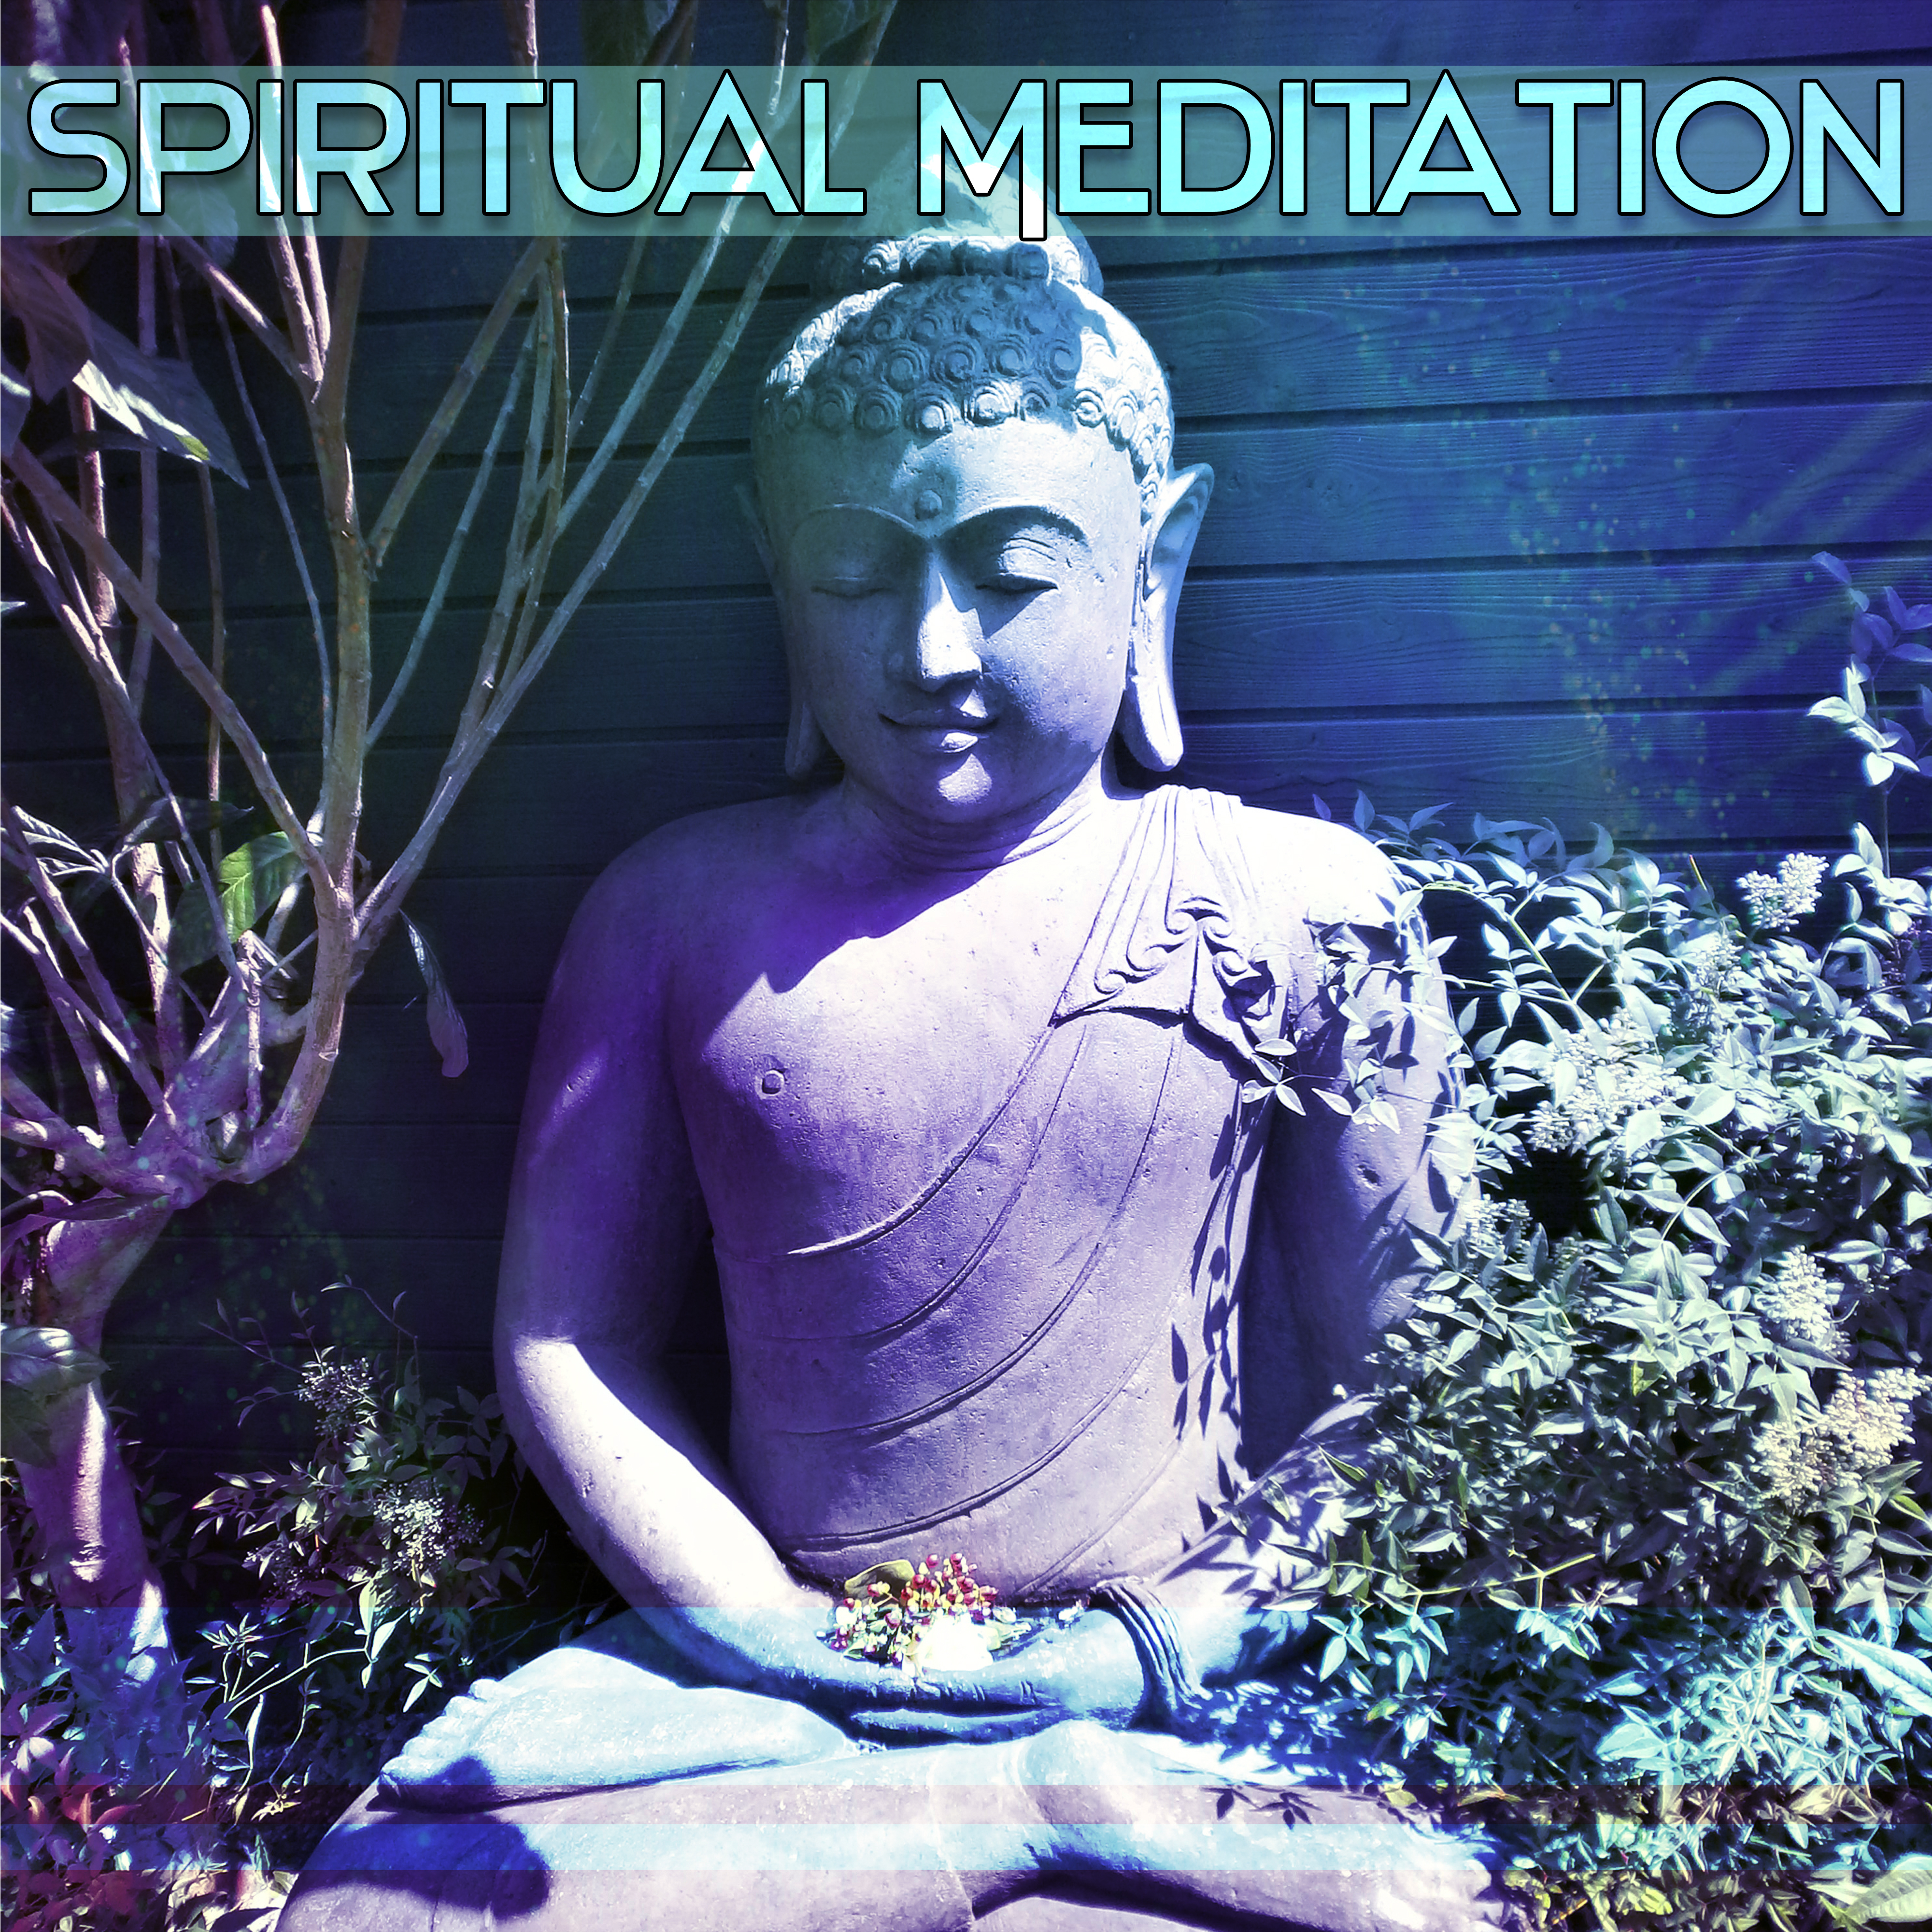 Spiritual Meditation – Yoga Training, Deep Focus, Better Concentration, Flute Music, Pure Mind, Relaxing Waves